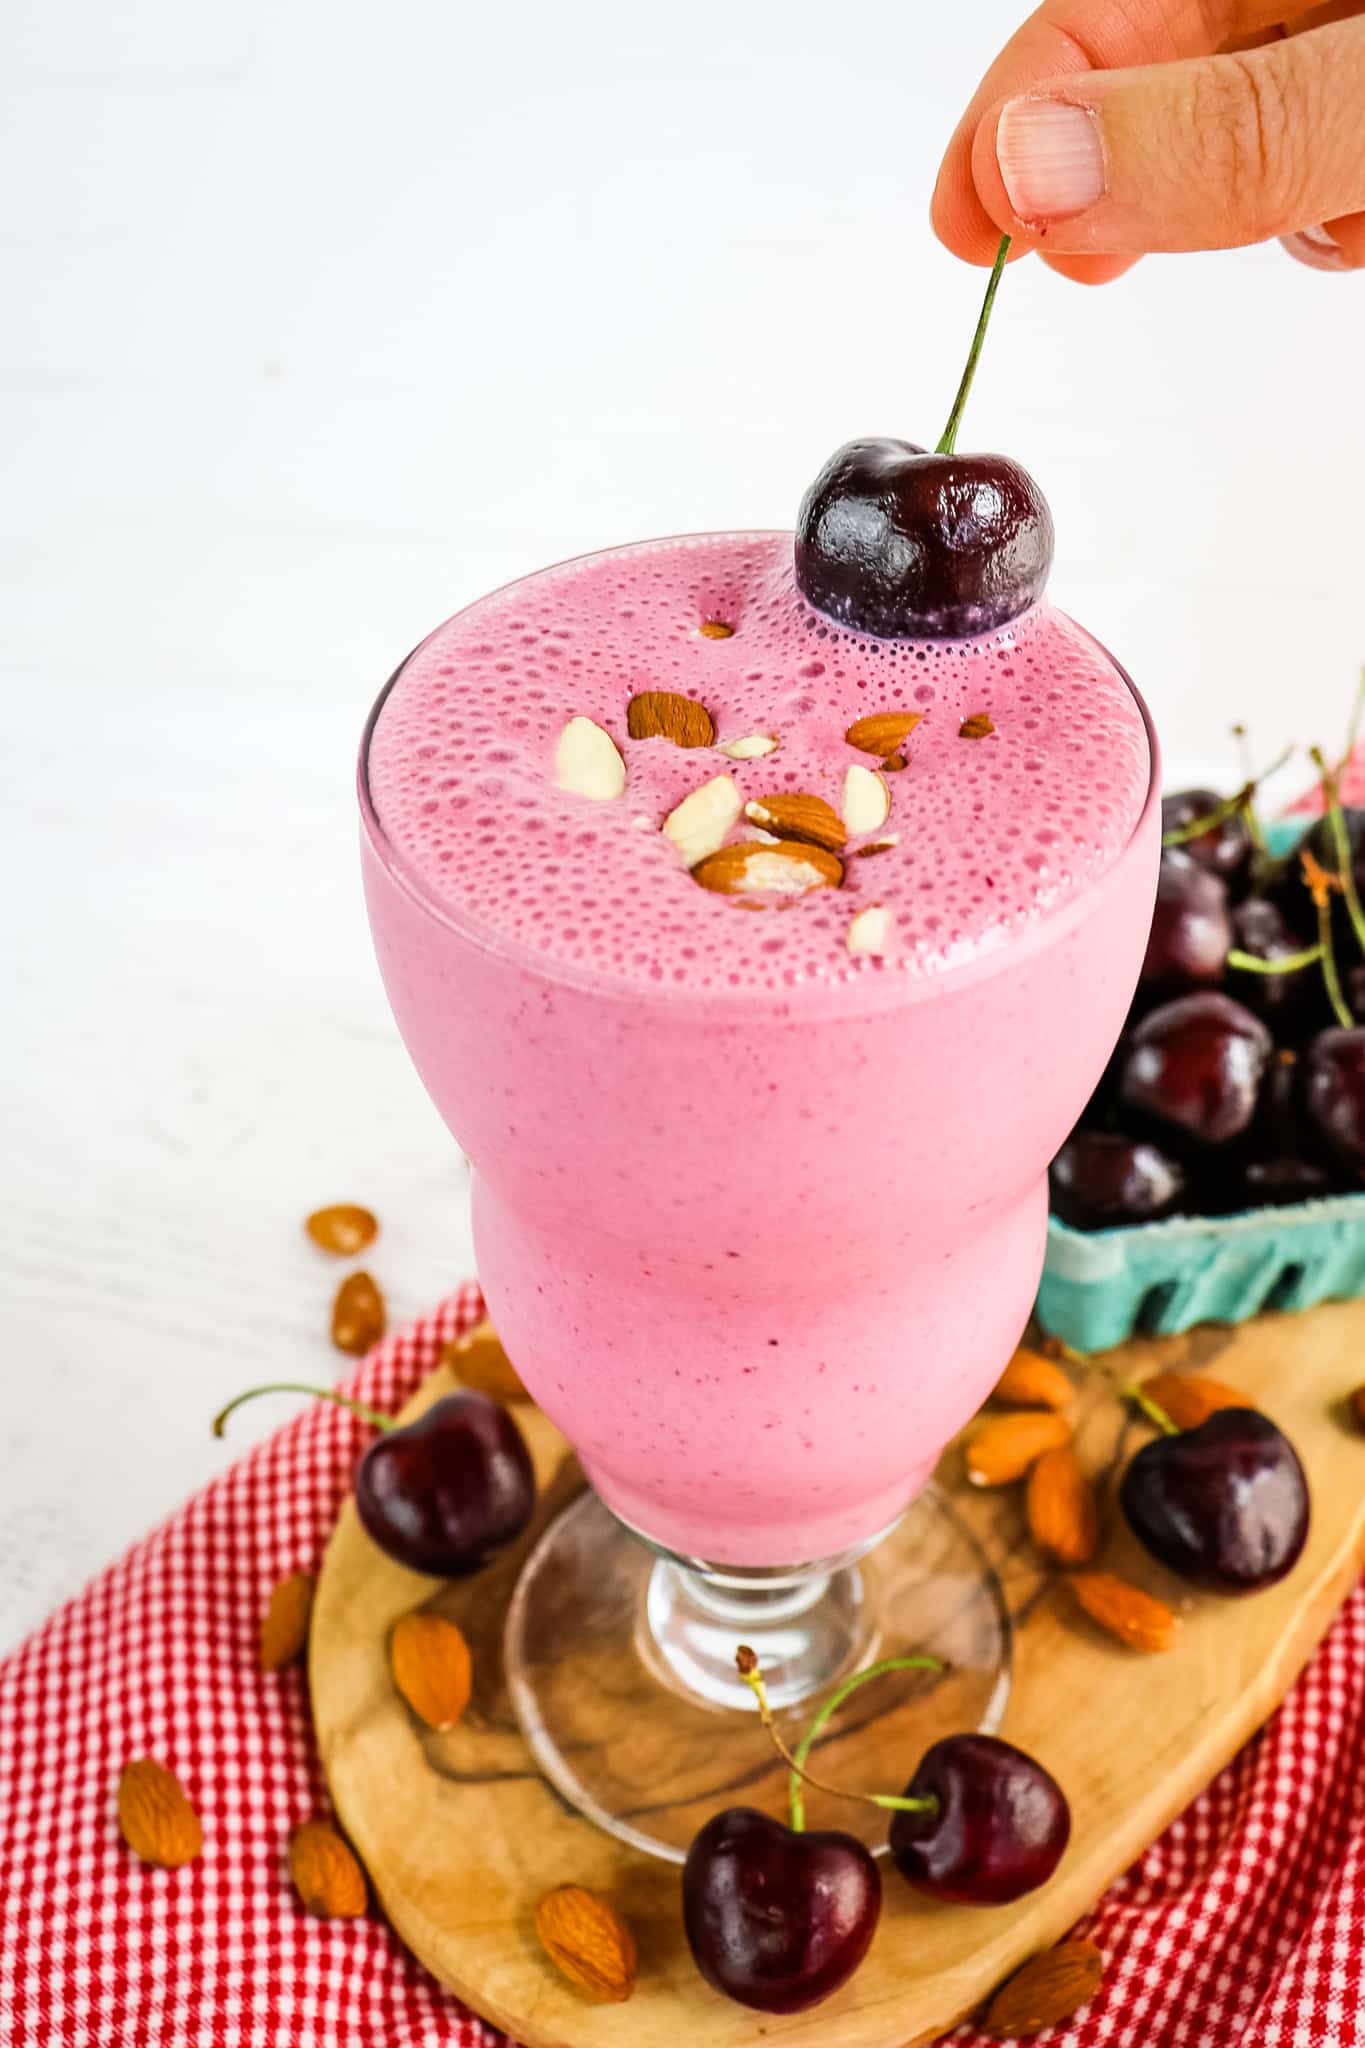 Cherry smoothie being topped with a cherry and sliced almonds.